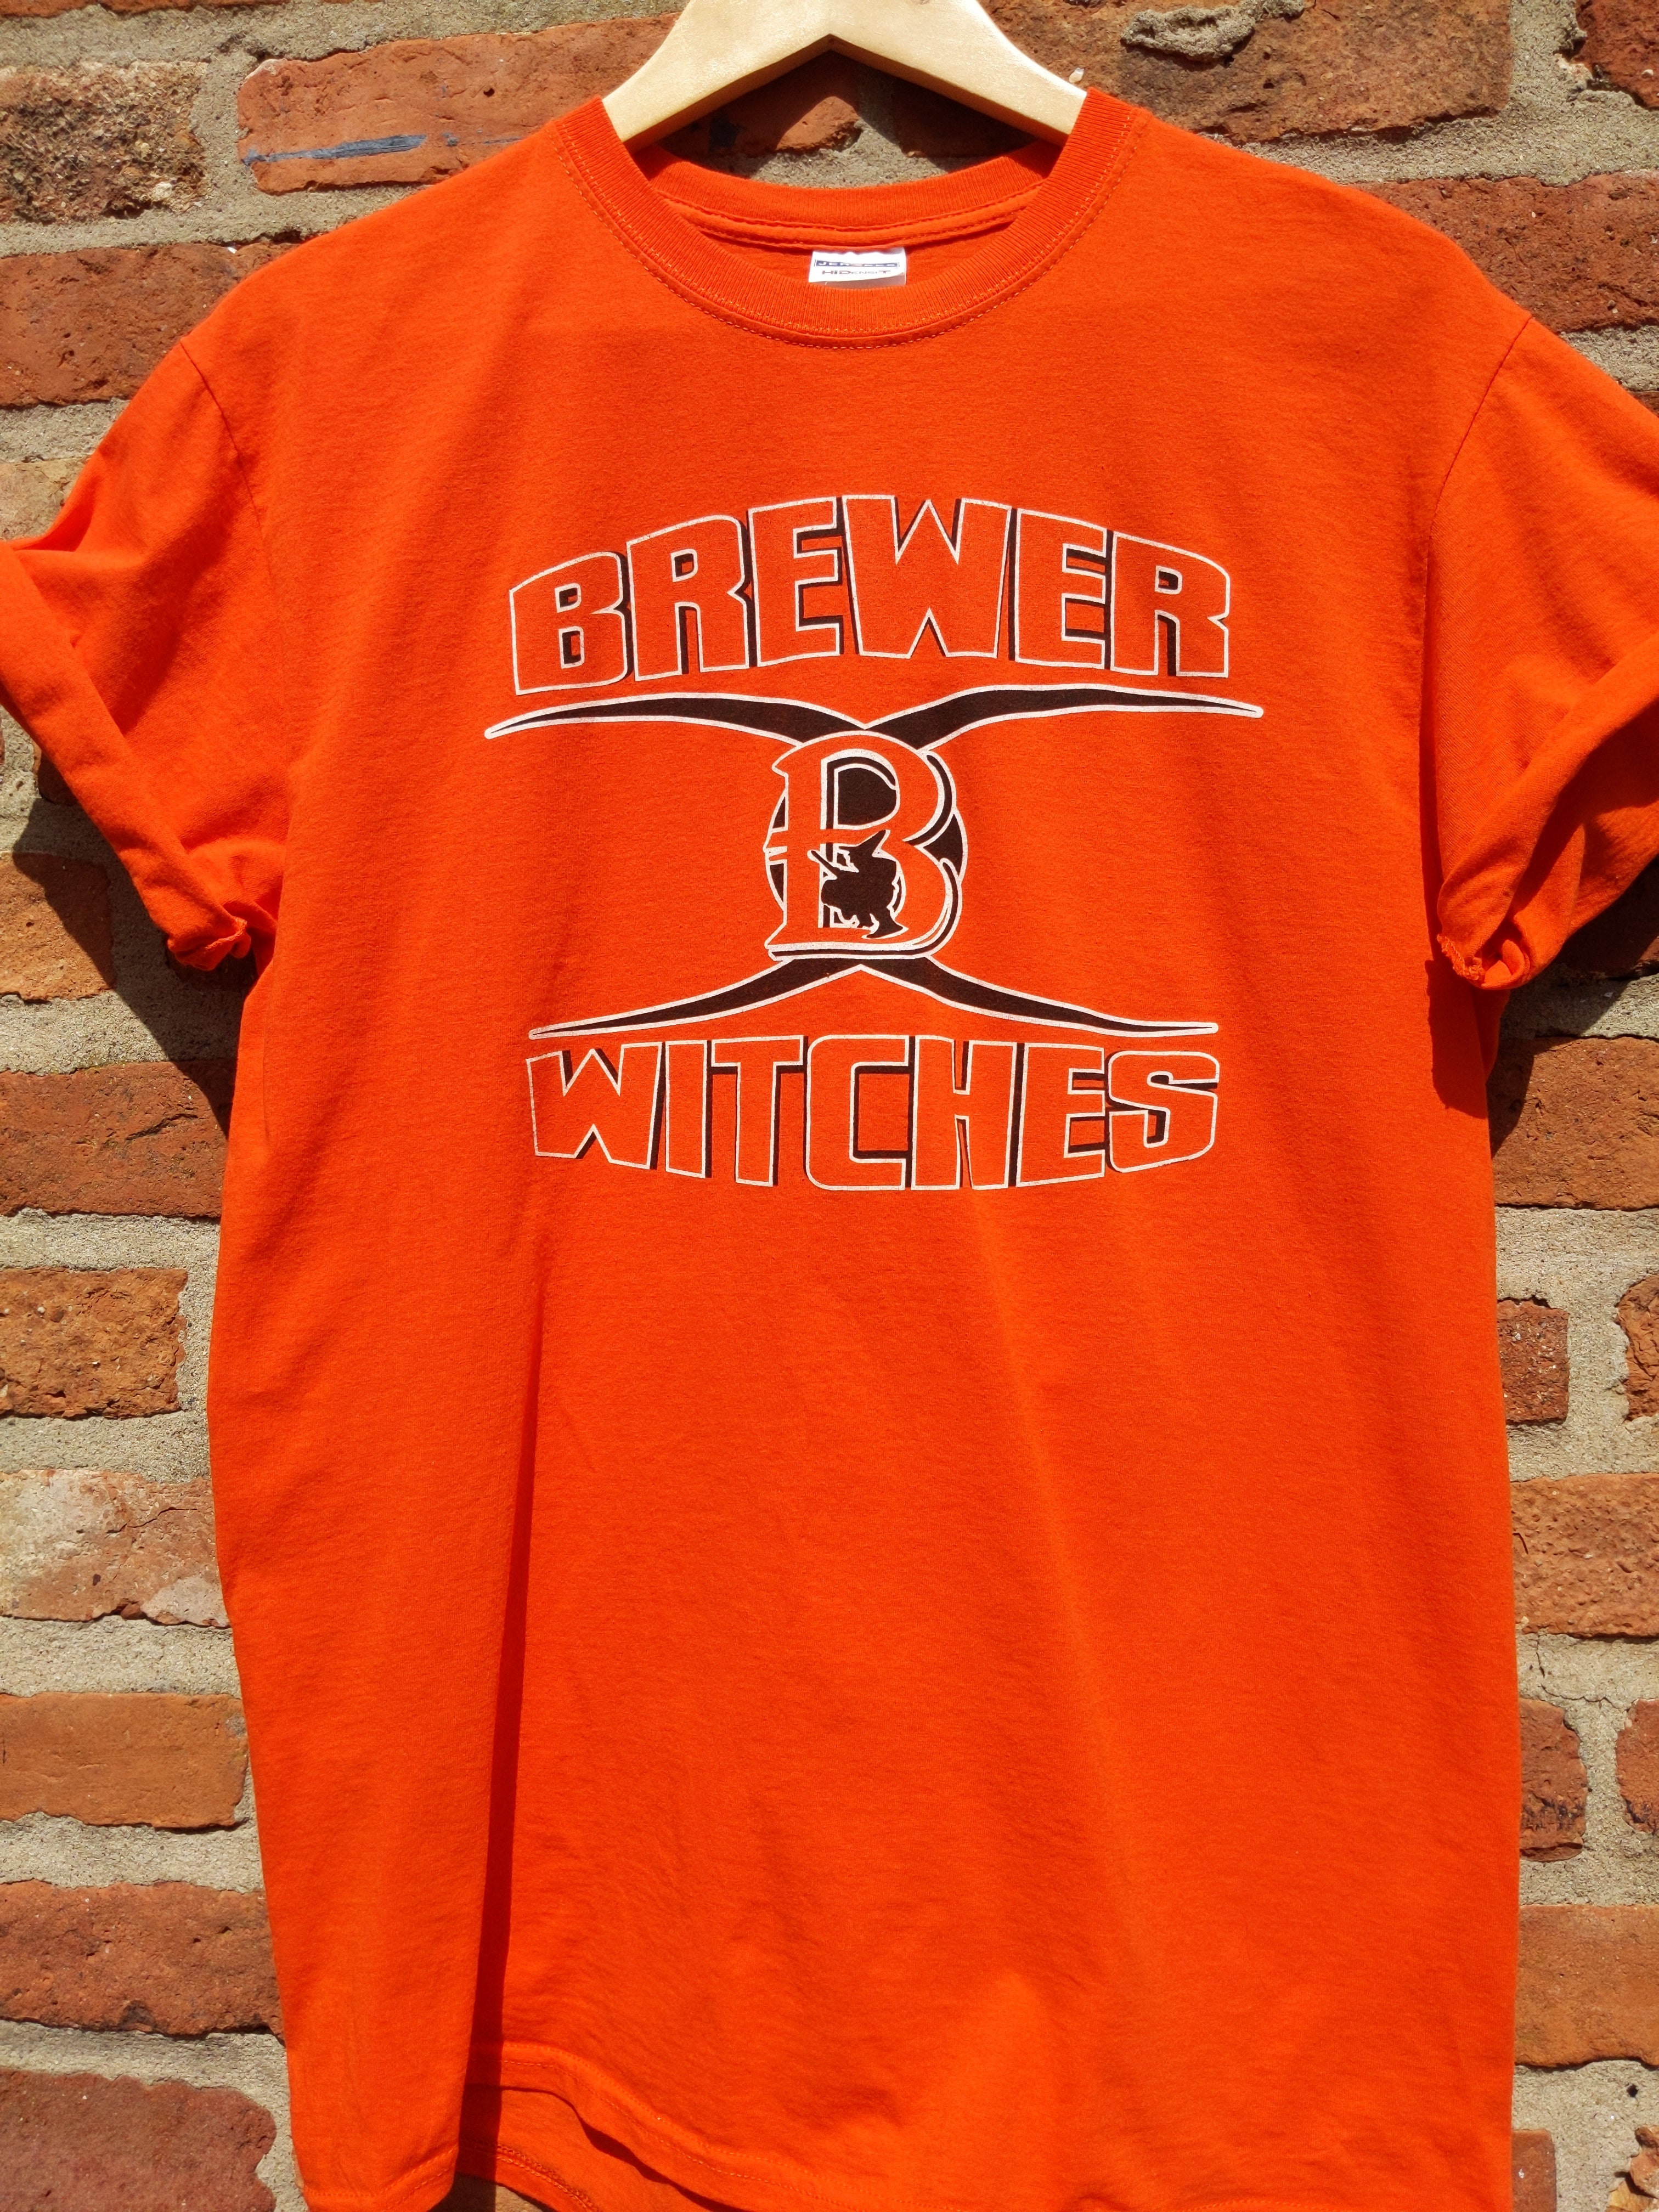 Retro Brewer Witches t-shirt M